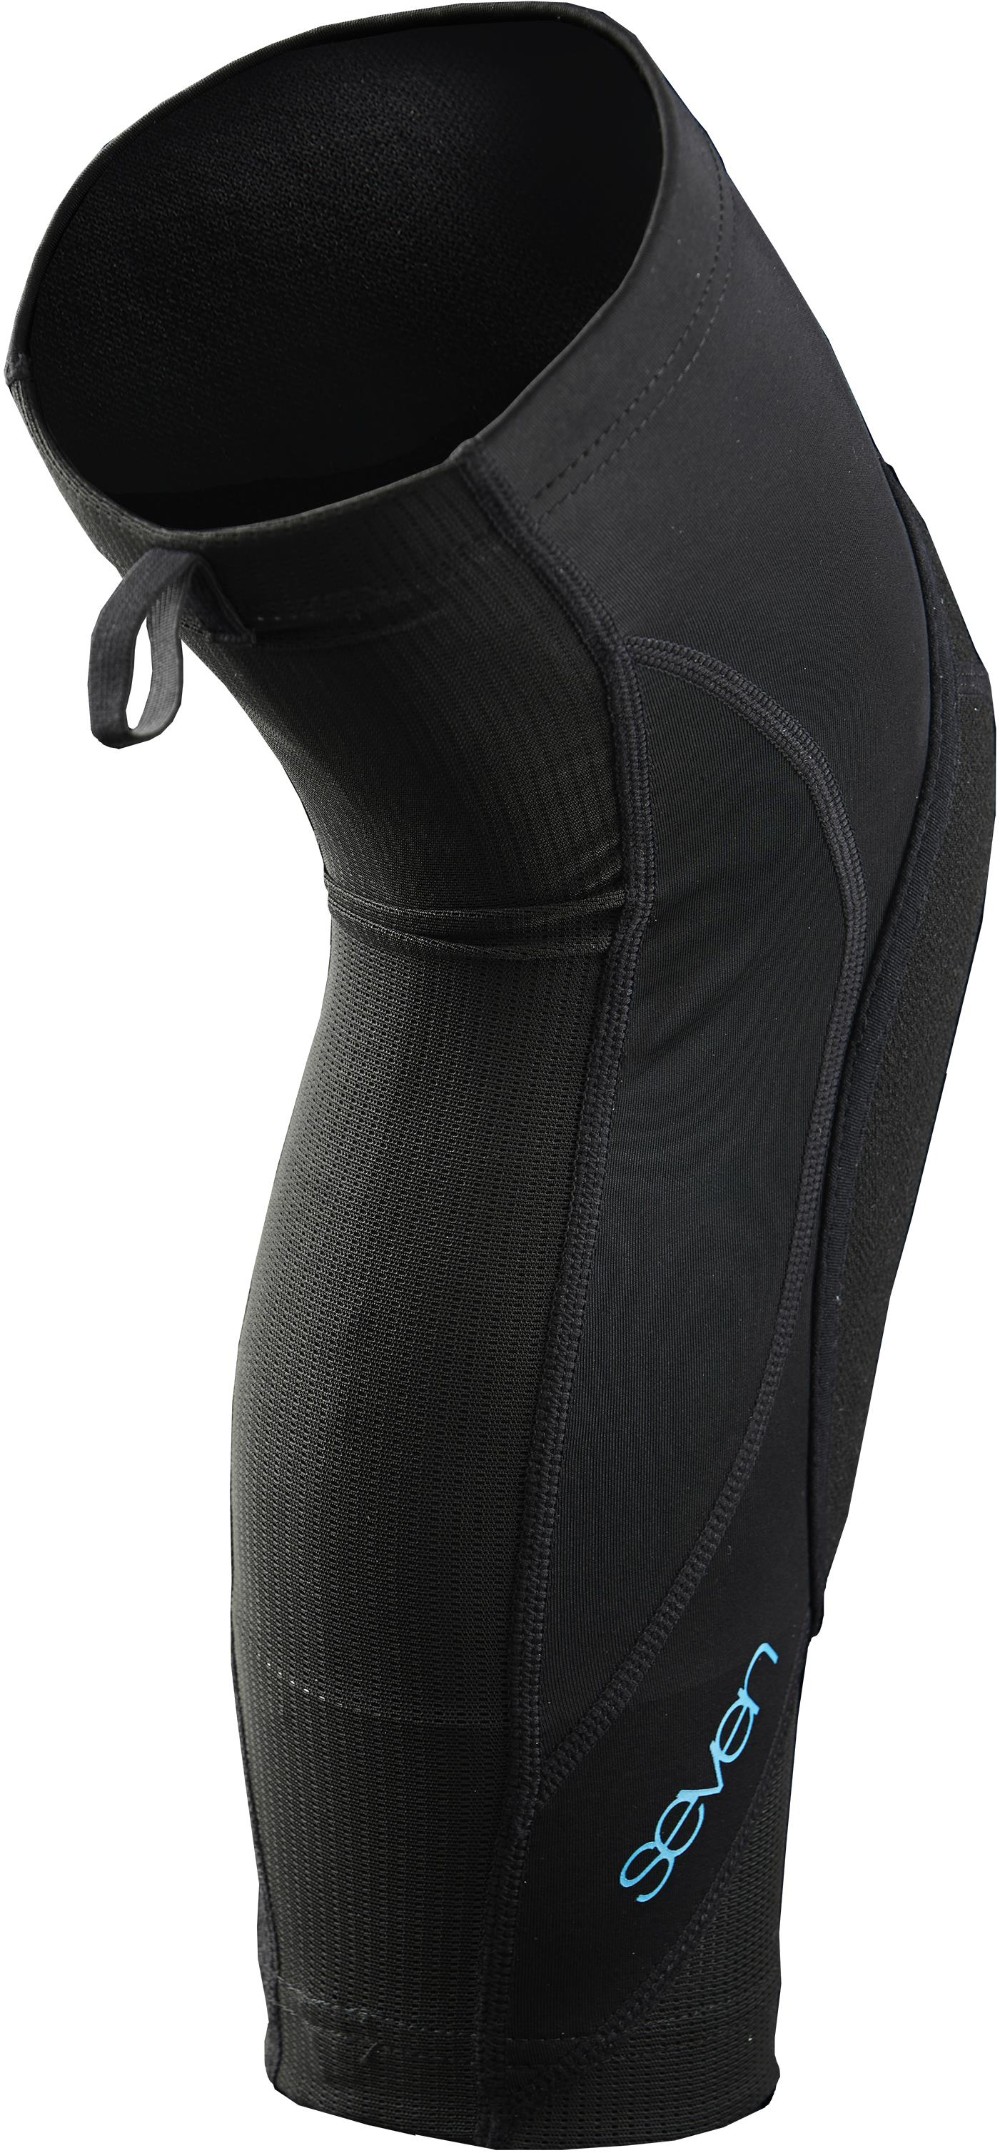 Transition Elbow Pads image 1